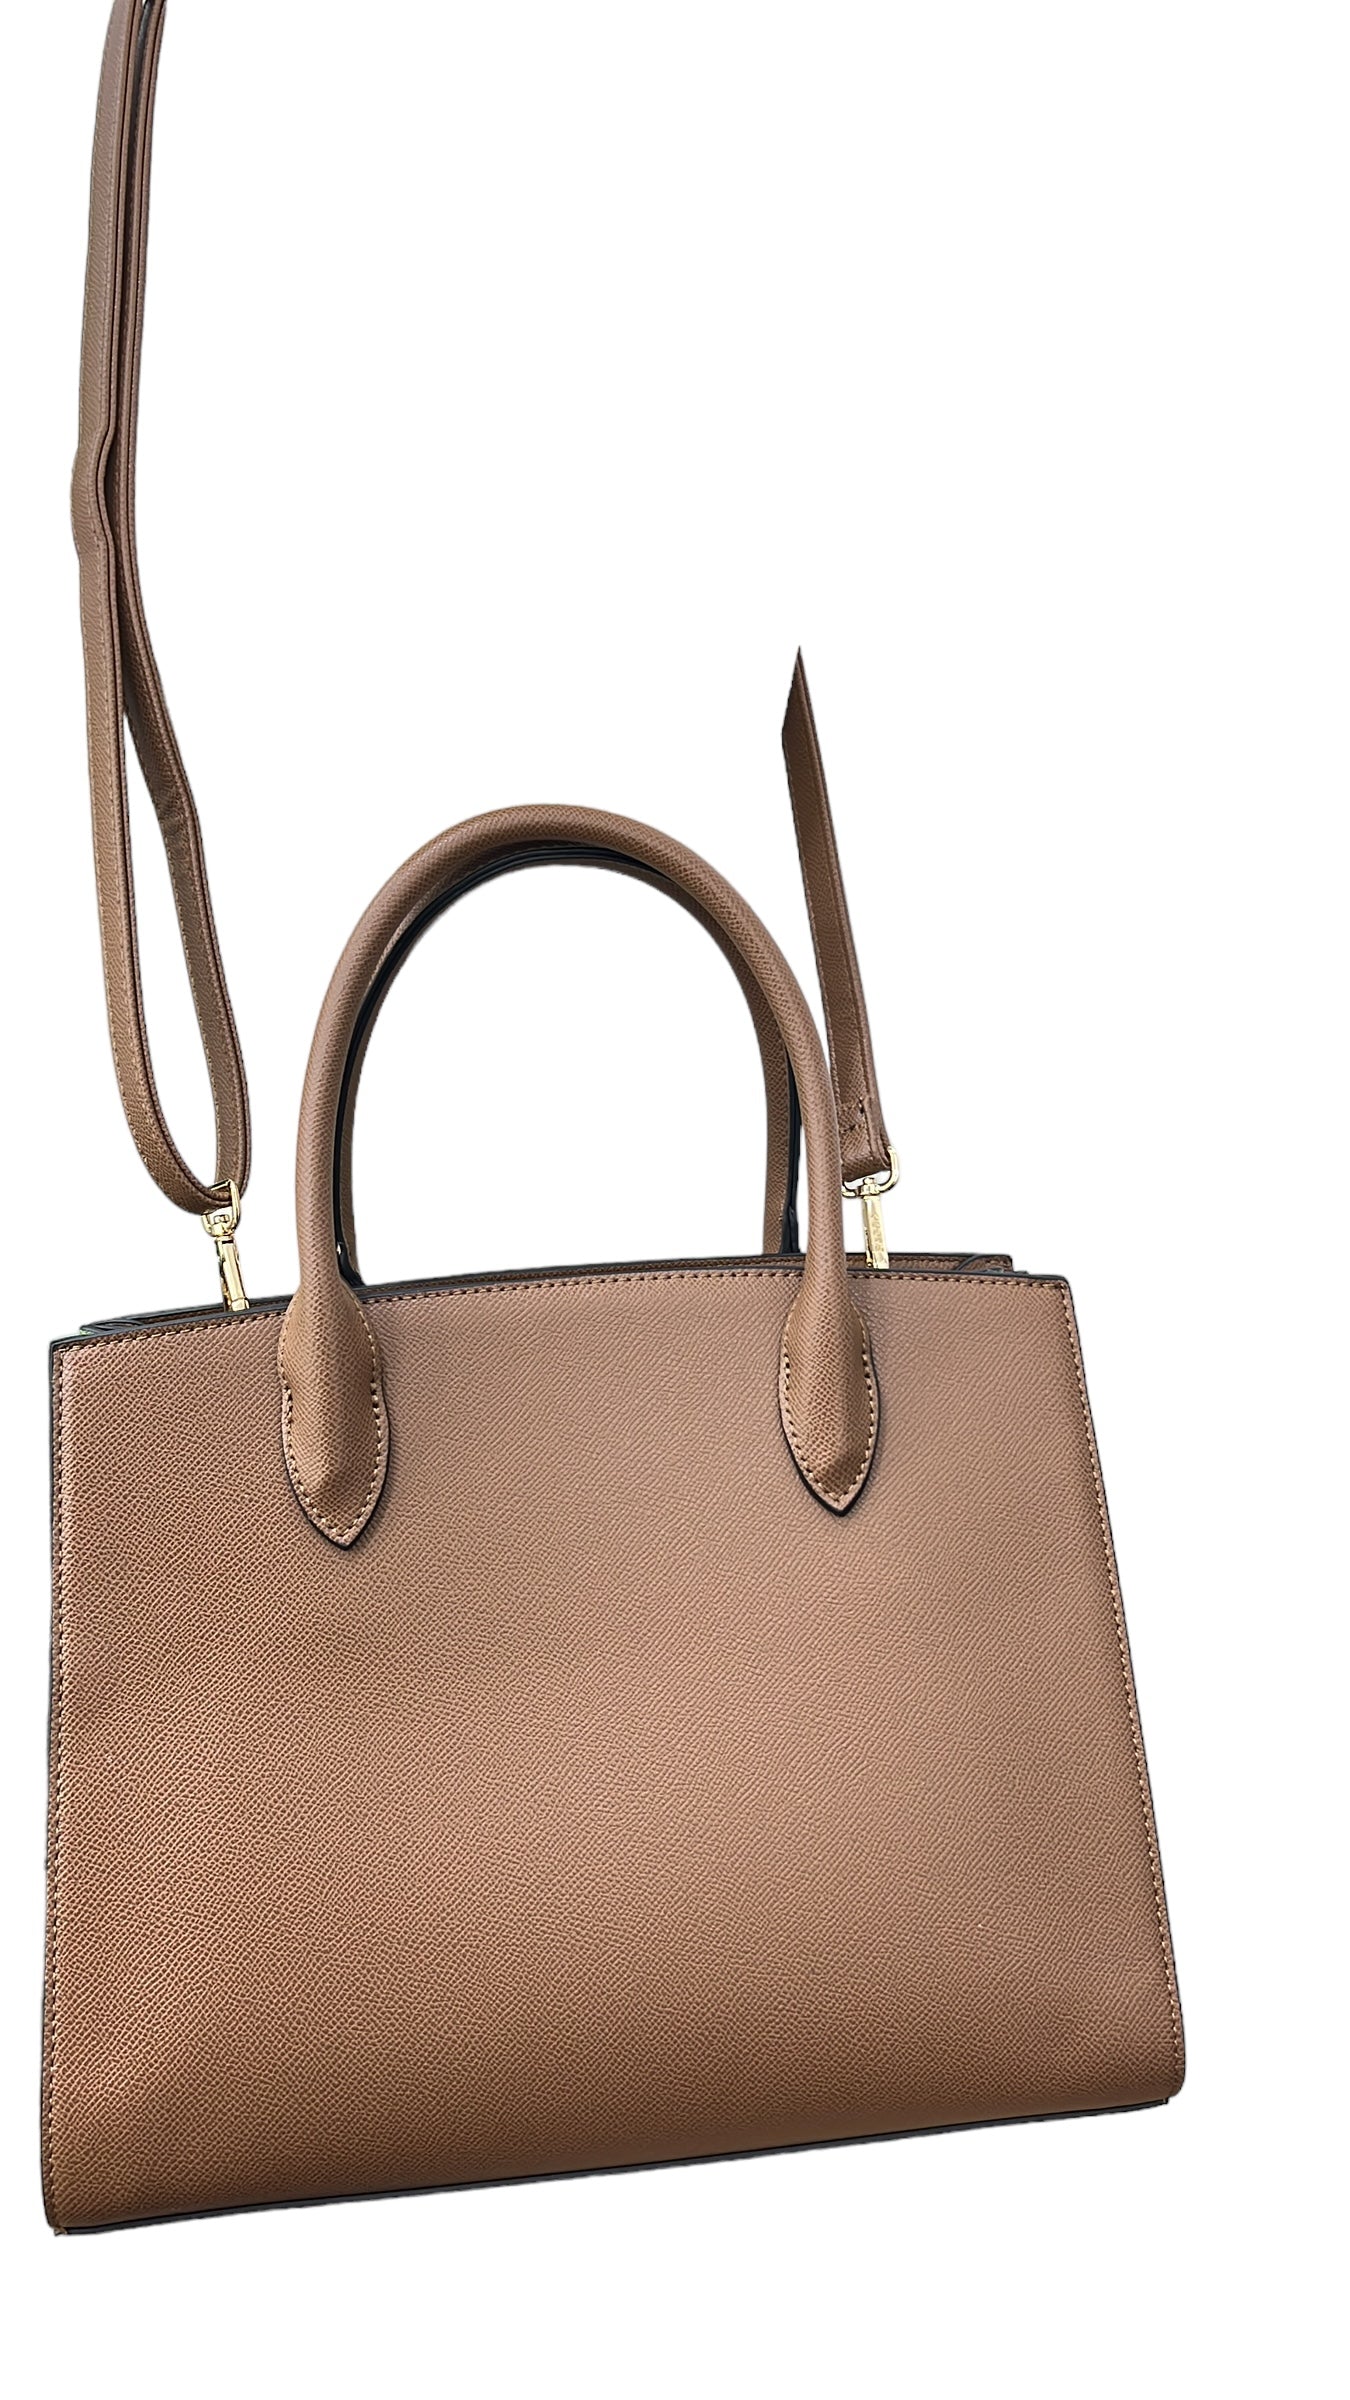 BAGCO TEXTURED STRUCTURED BAG IN BROWN